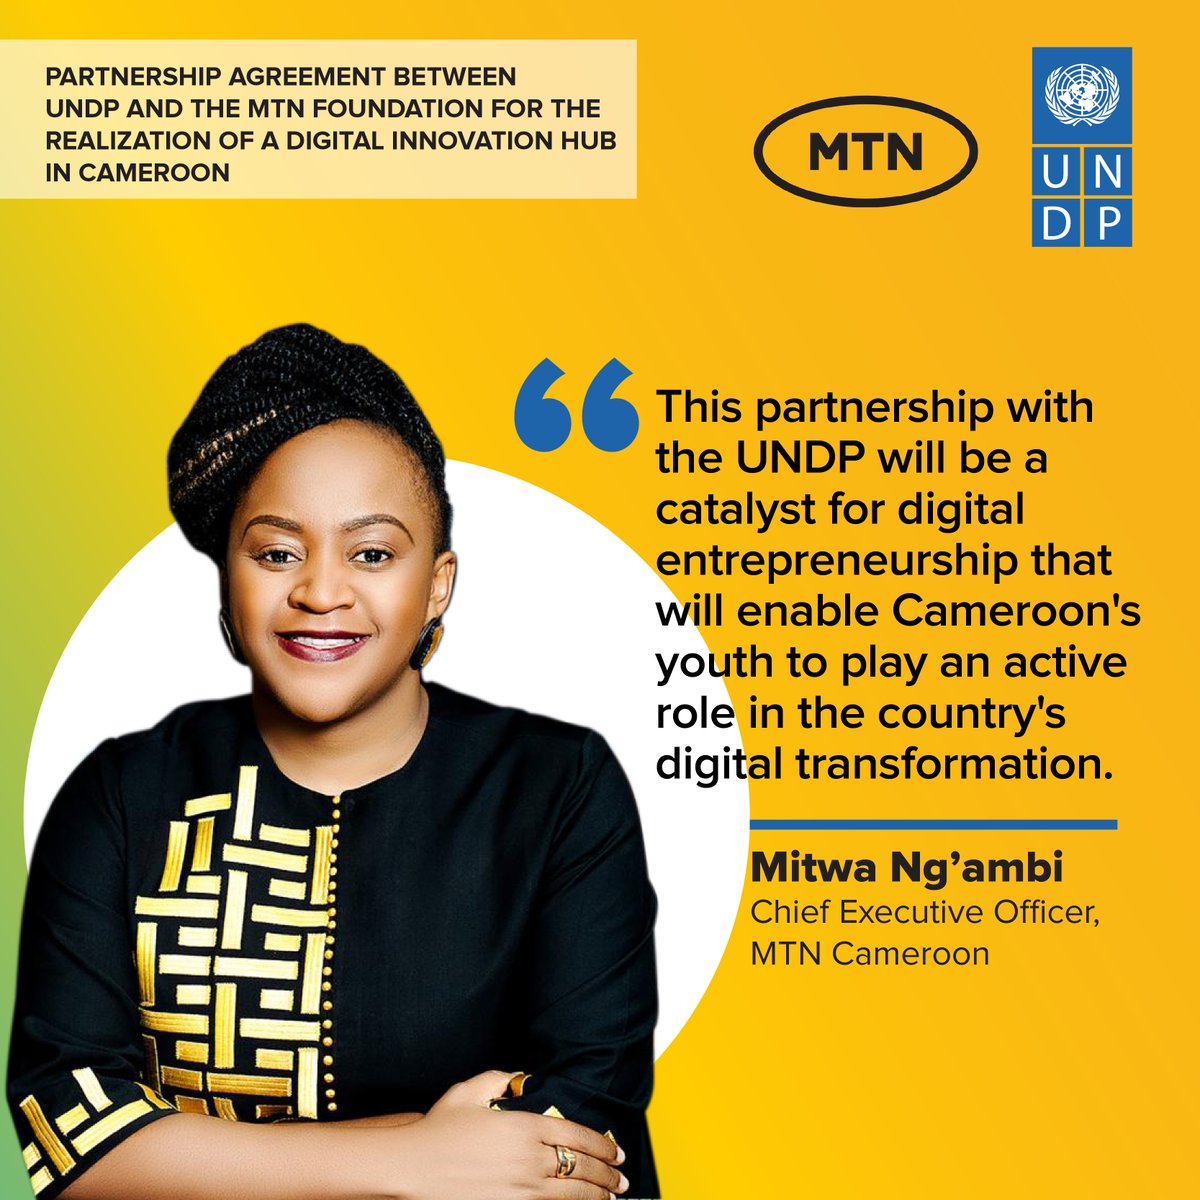 .@mkngambi, CEO of @MTNCameroon, highlights the important role the Digital Innovation Hub as a game-changer for digital entrepreneurship and youth development in Cameroon. #DoingGoodTogether #SDG9 #SDG17